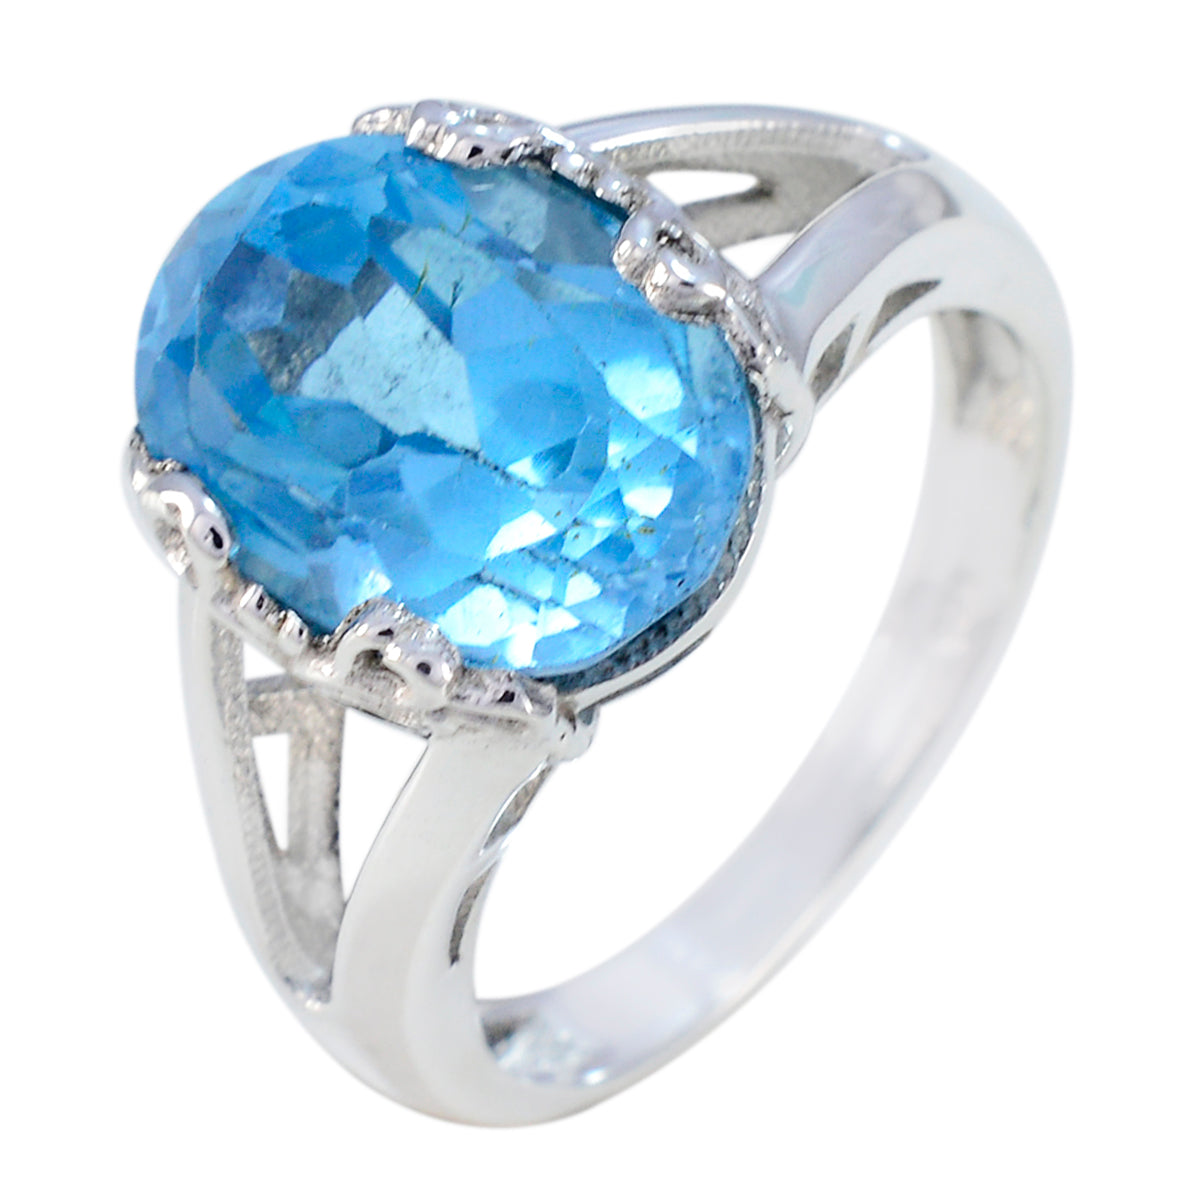 Cunning Gemstone Blue Topaz Sterling Silver Ring Jewelry Packaging